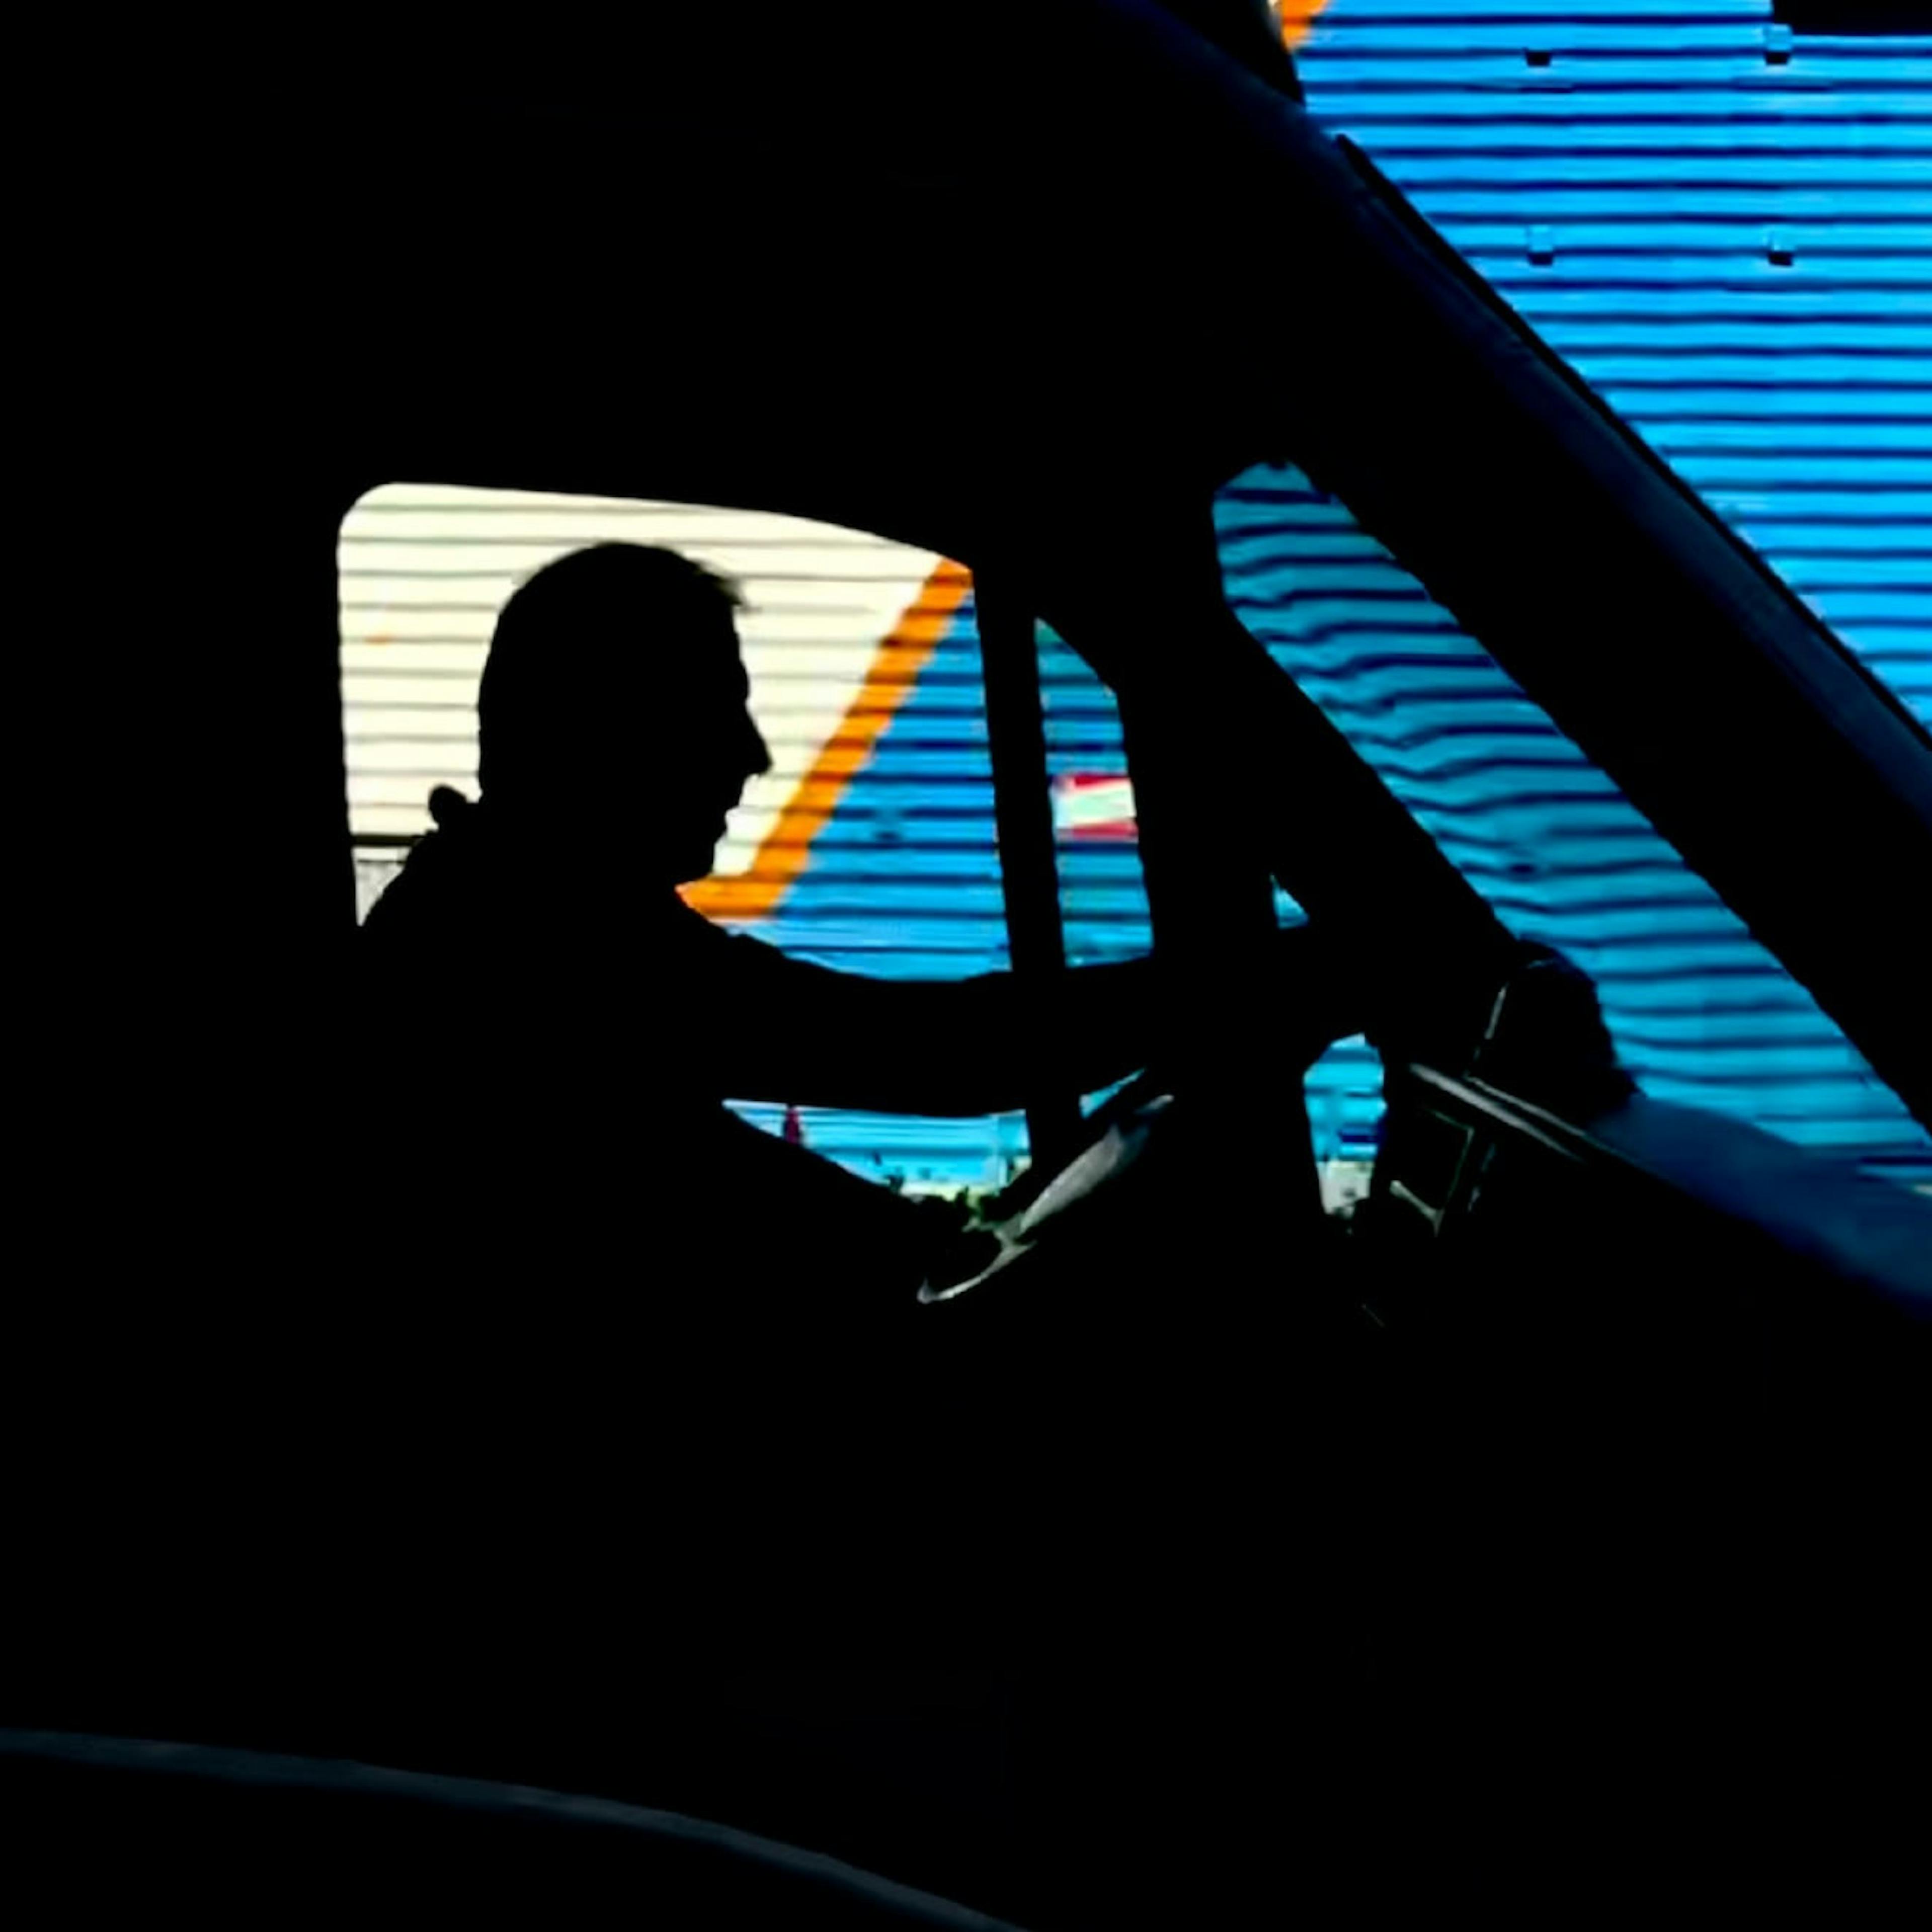 A silhouette of a truck driver behind the wheel.